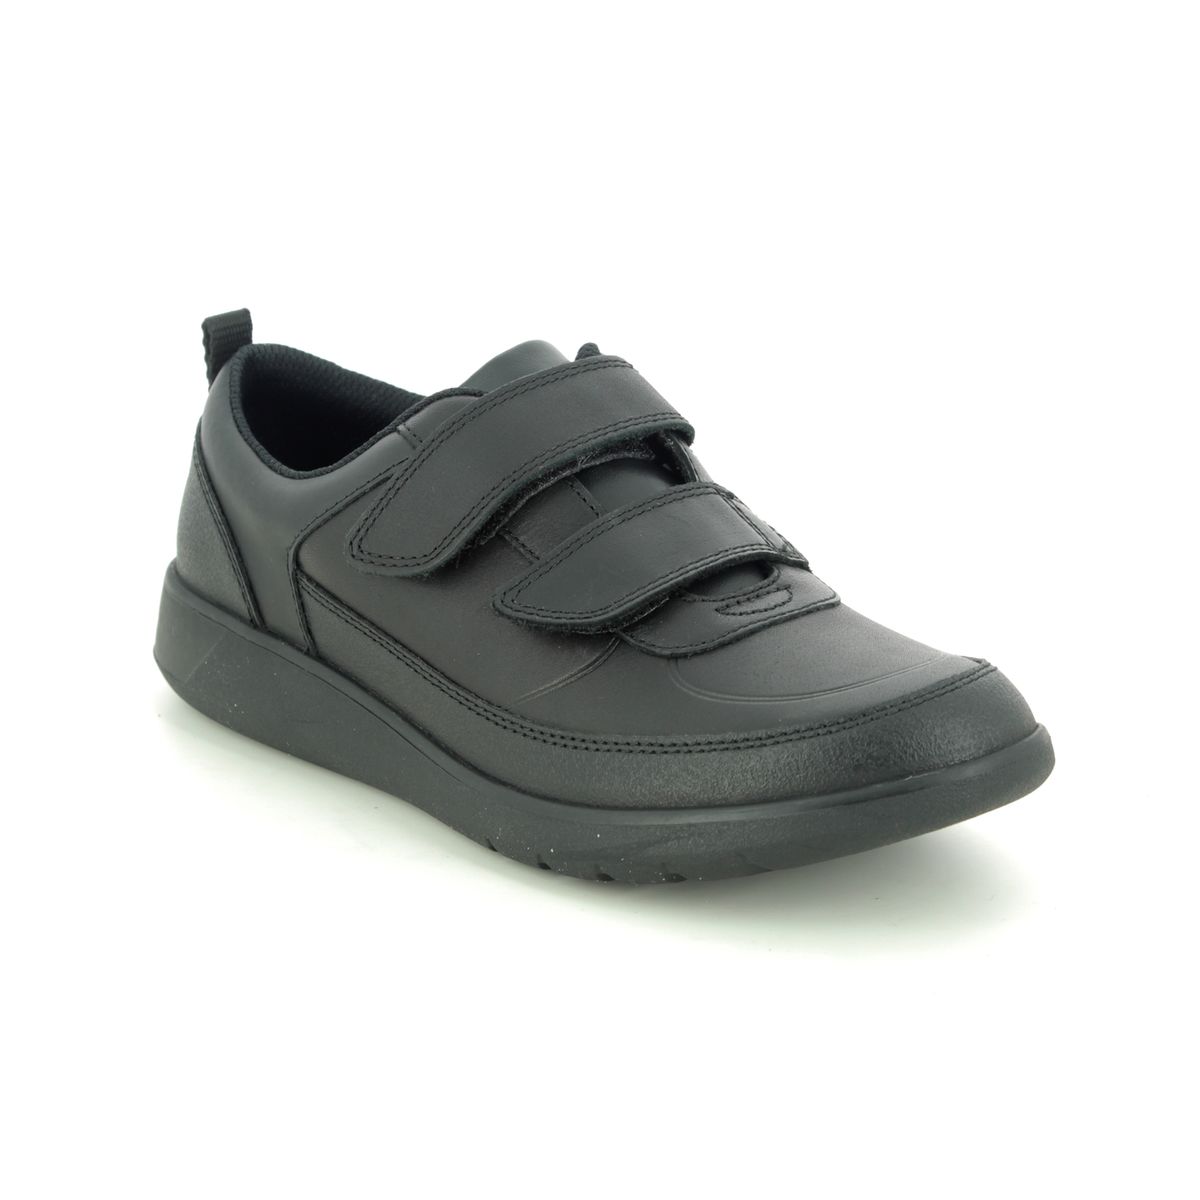 Clarks Scape Flare Y Black Leather Kids Boys Shoes 494098H In Size 3 In Plain Black Leather H Width Fitting Extra Wide For School For kids